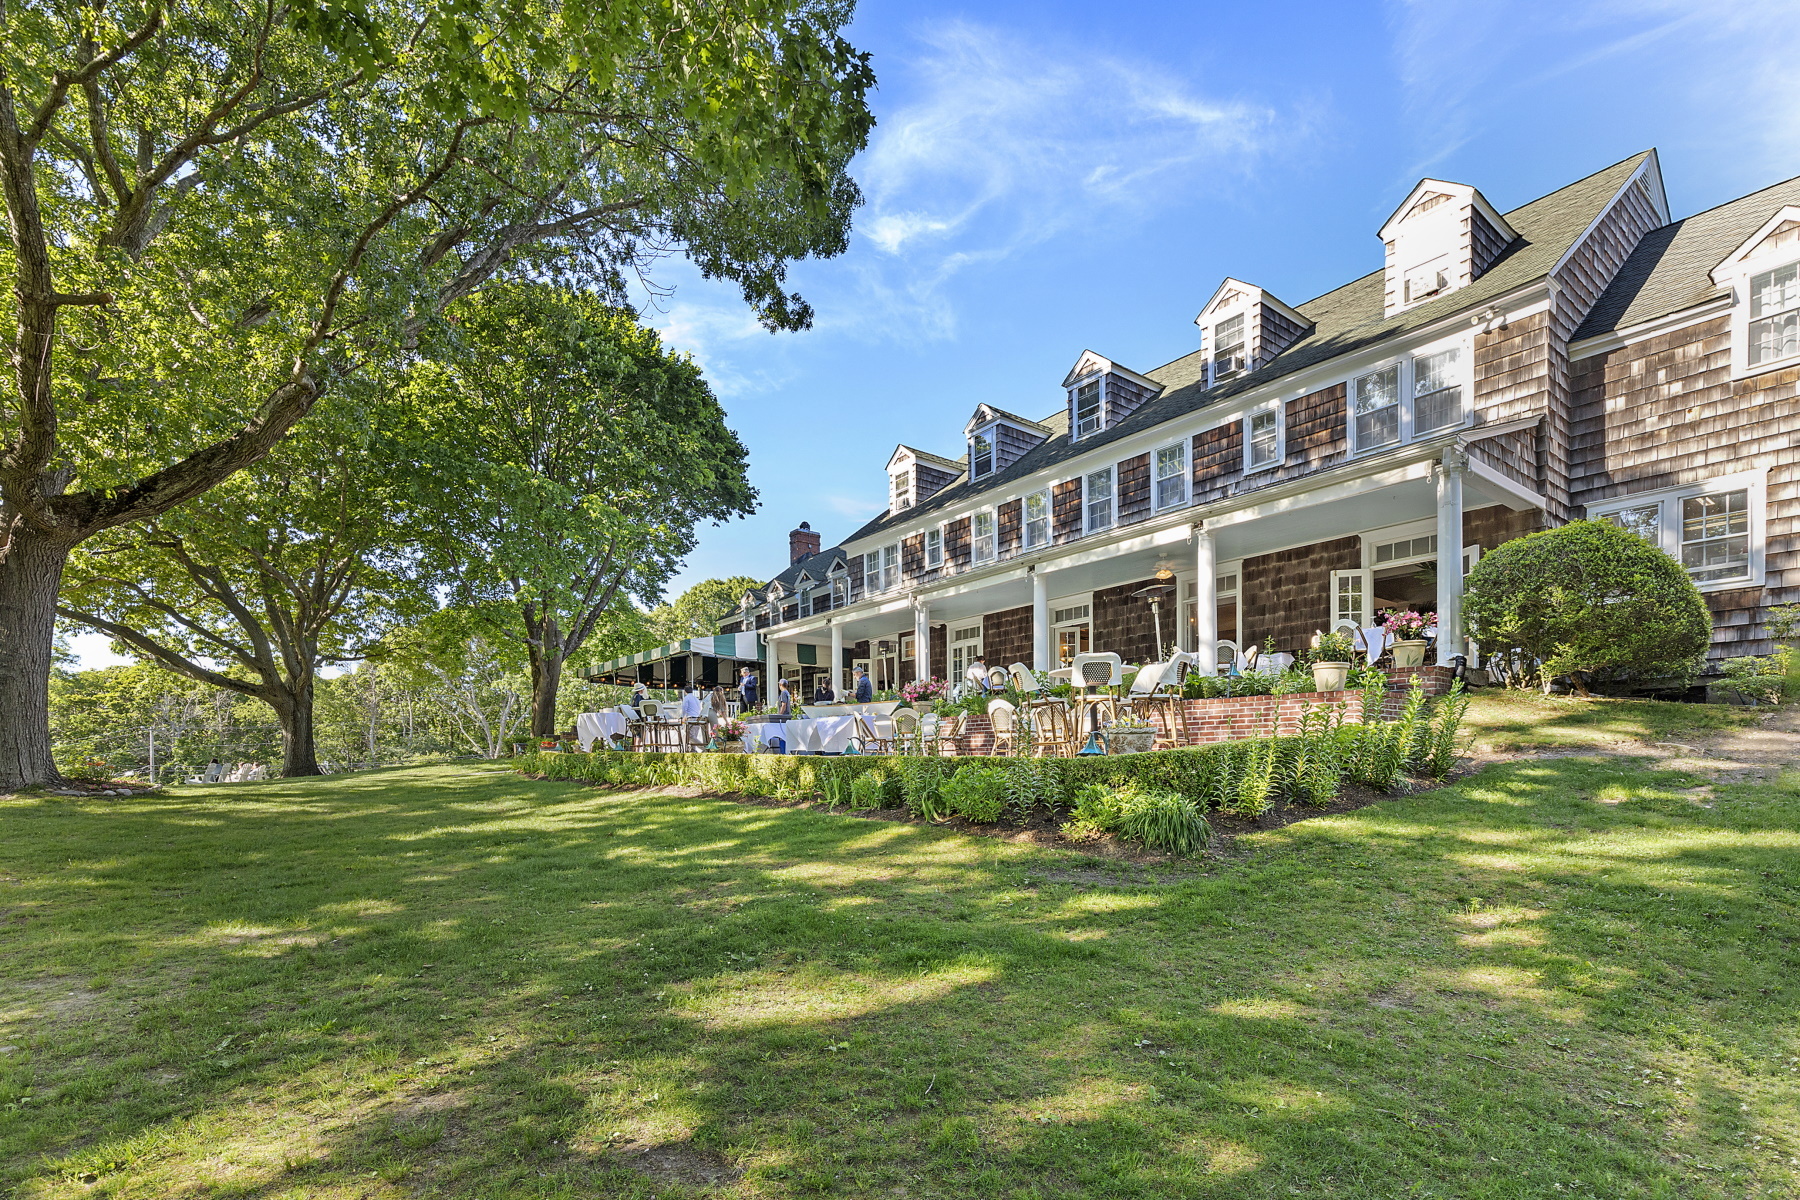 A stunning view of the Rams Head Inn building in Shelter Island, New York.